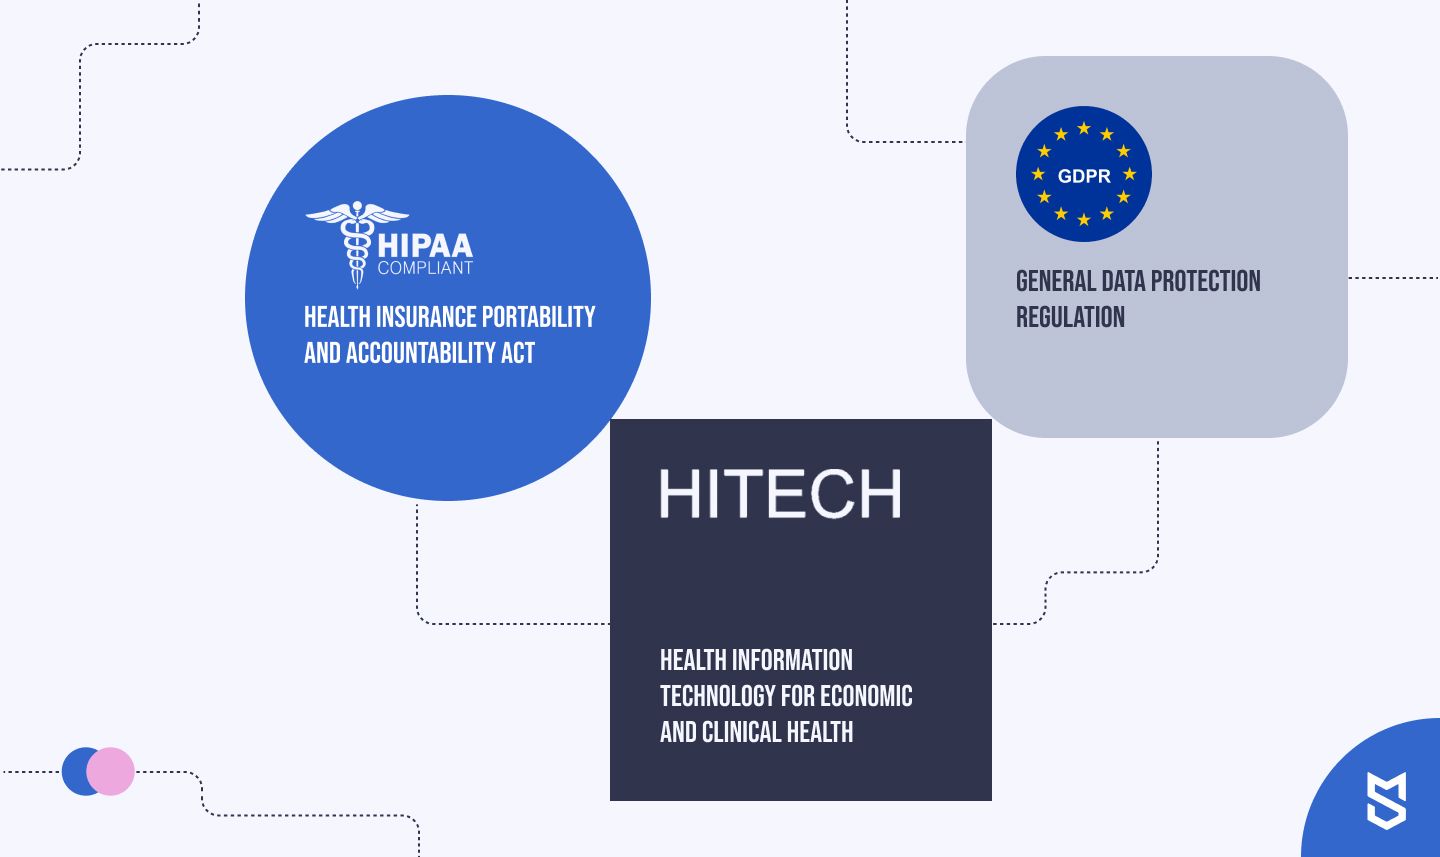 HIPAA, HITECH, GDPR (and other scary abbreviations)